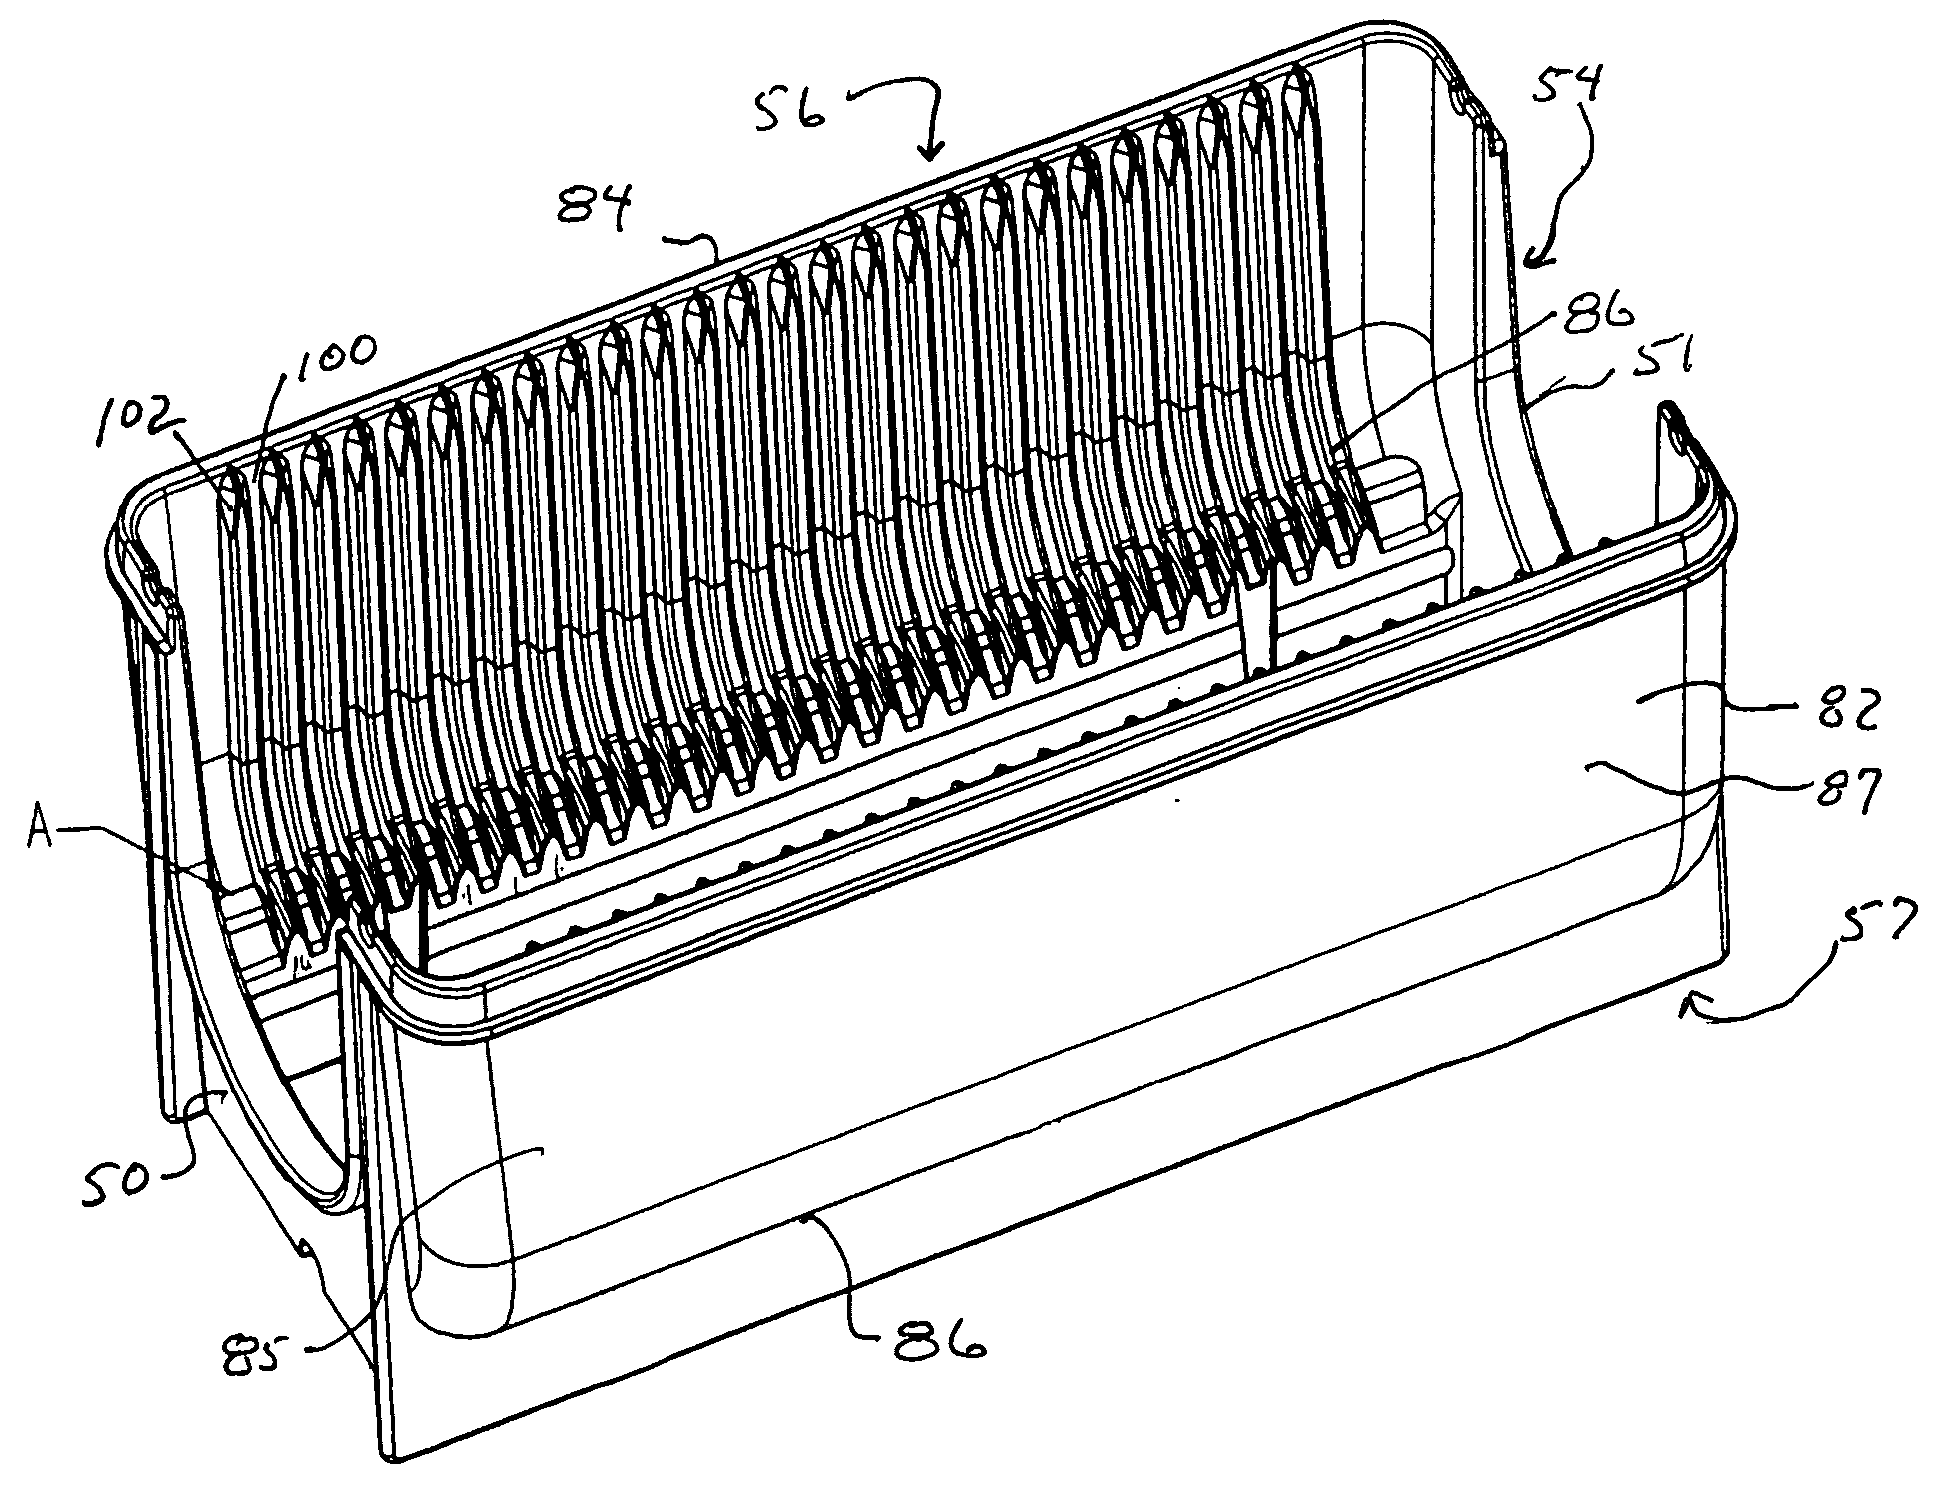 Shipper with tooth design for improved loading